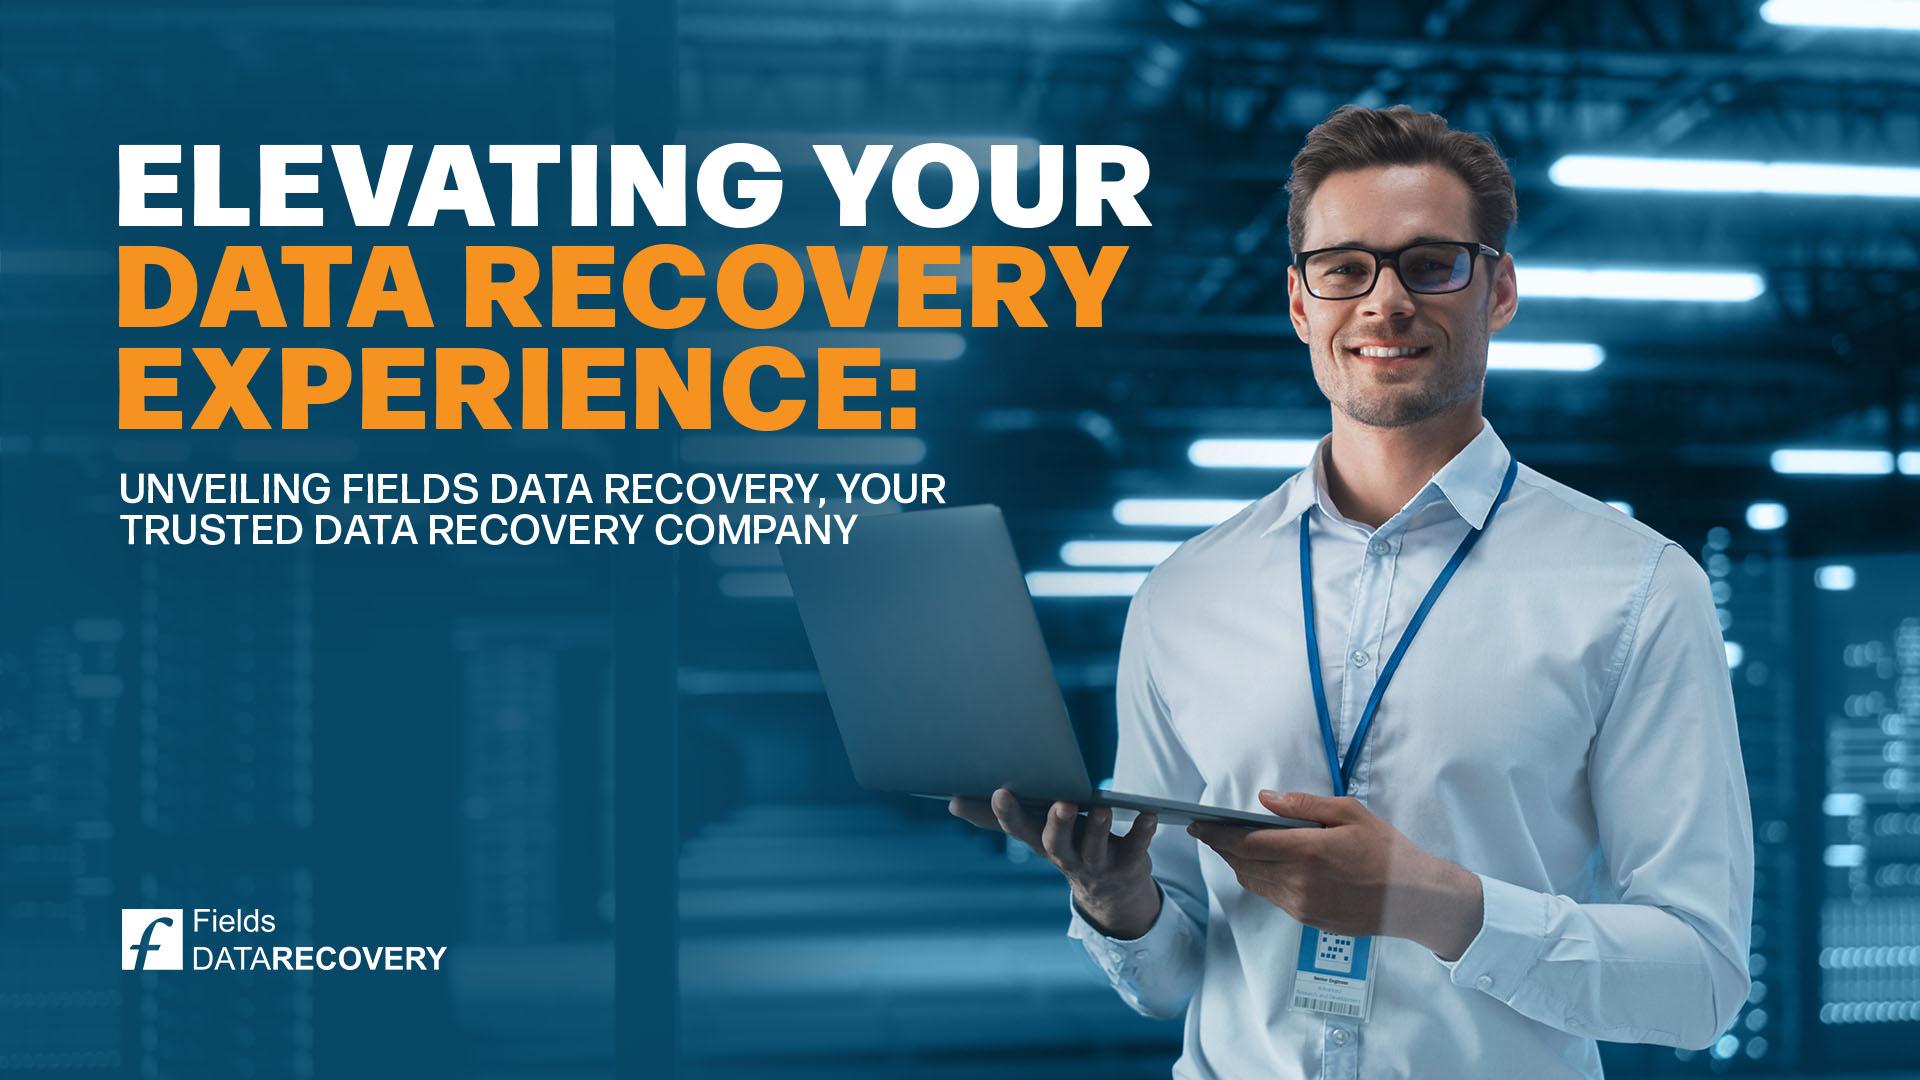 Elevating Your Data Recovery Experience: Unveiling Fields Data Recovery, Your Trusted Data Recovery Company